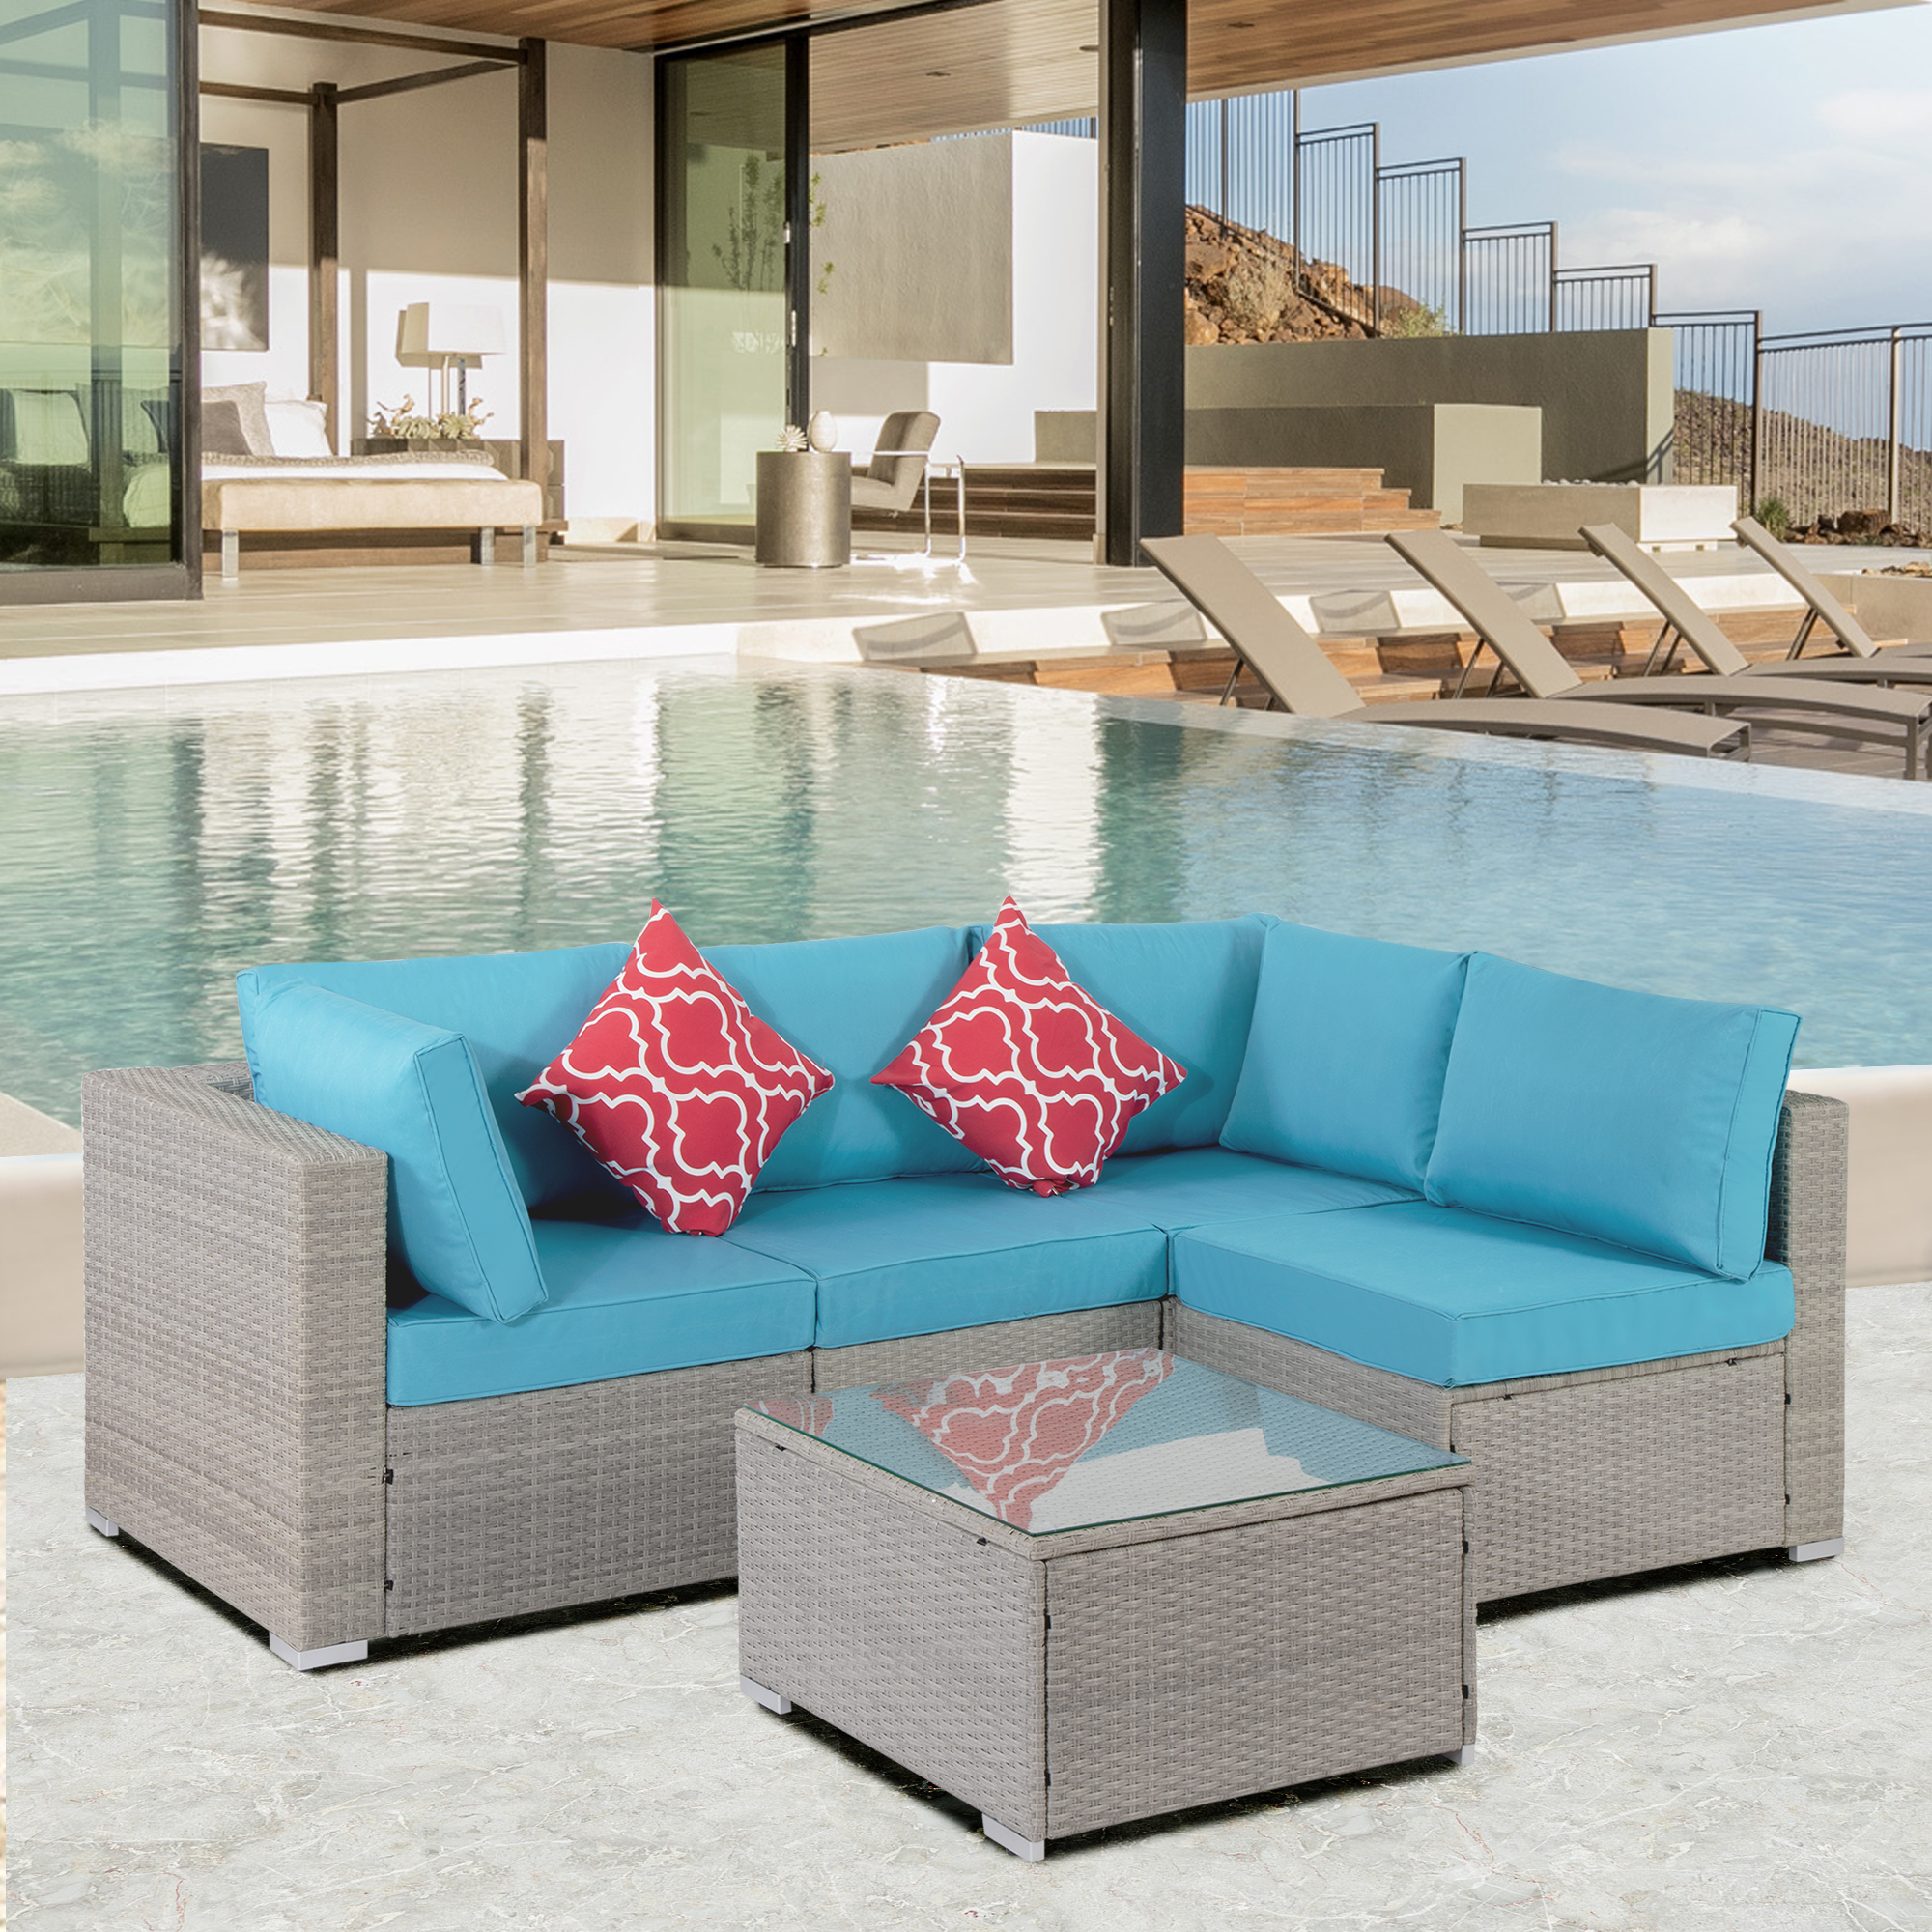 Outdoor Garden Patio Furniture 5-Piece PE Rattan Wicker Sectional Cushioned Sofa Sets with 2 Pillows and Coffee Table-Boyel Living